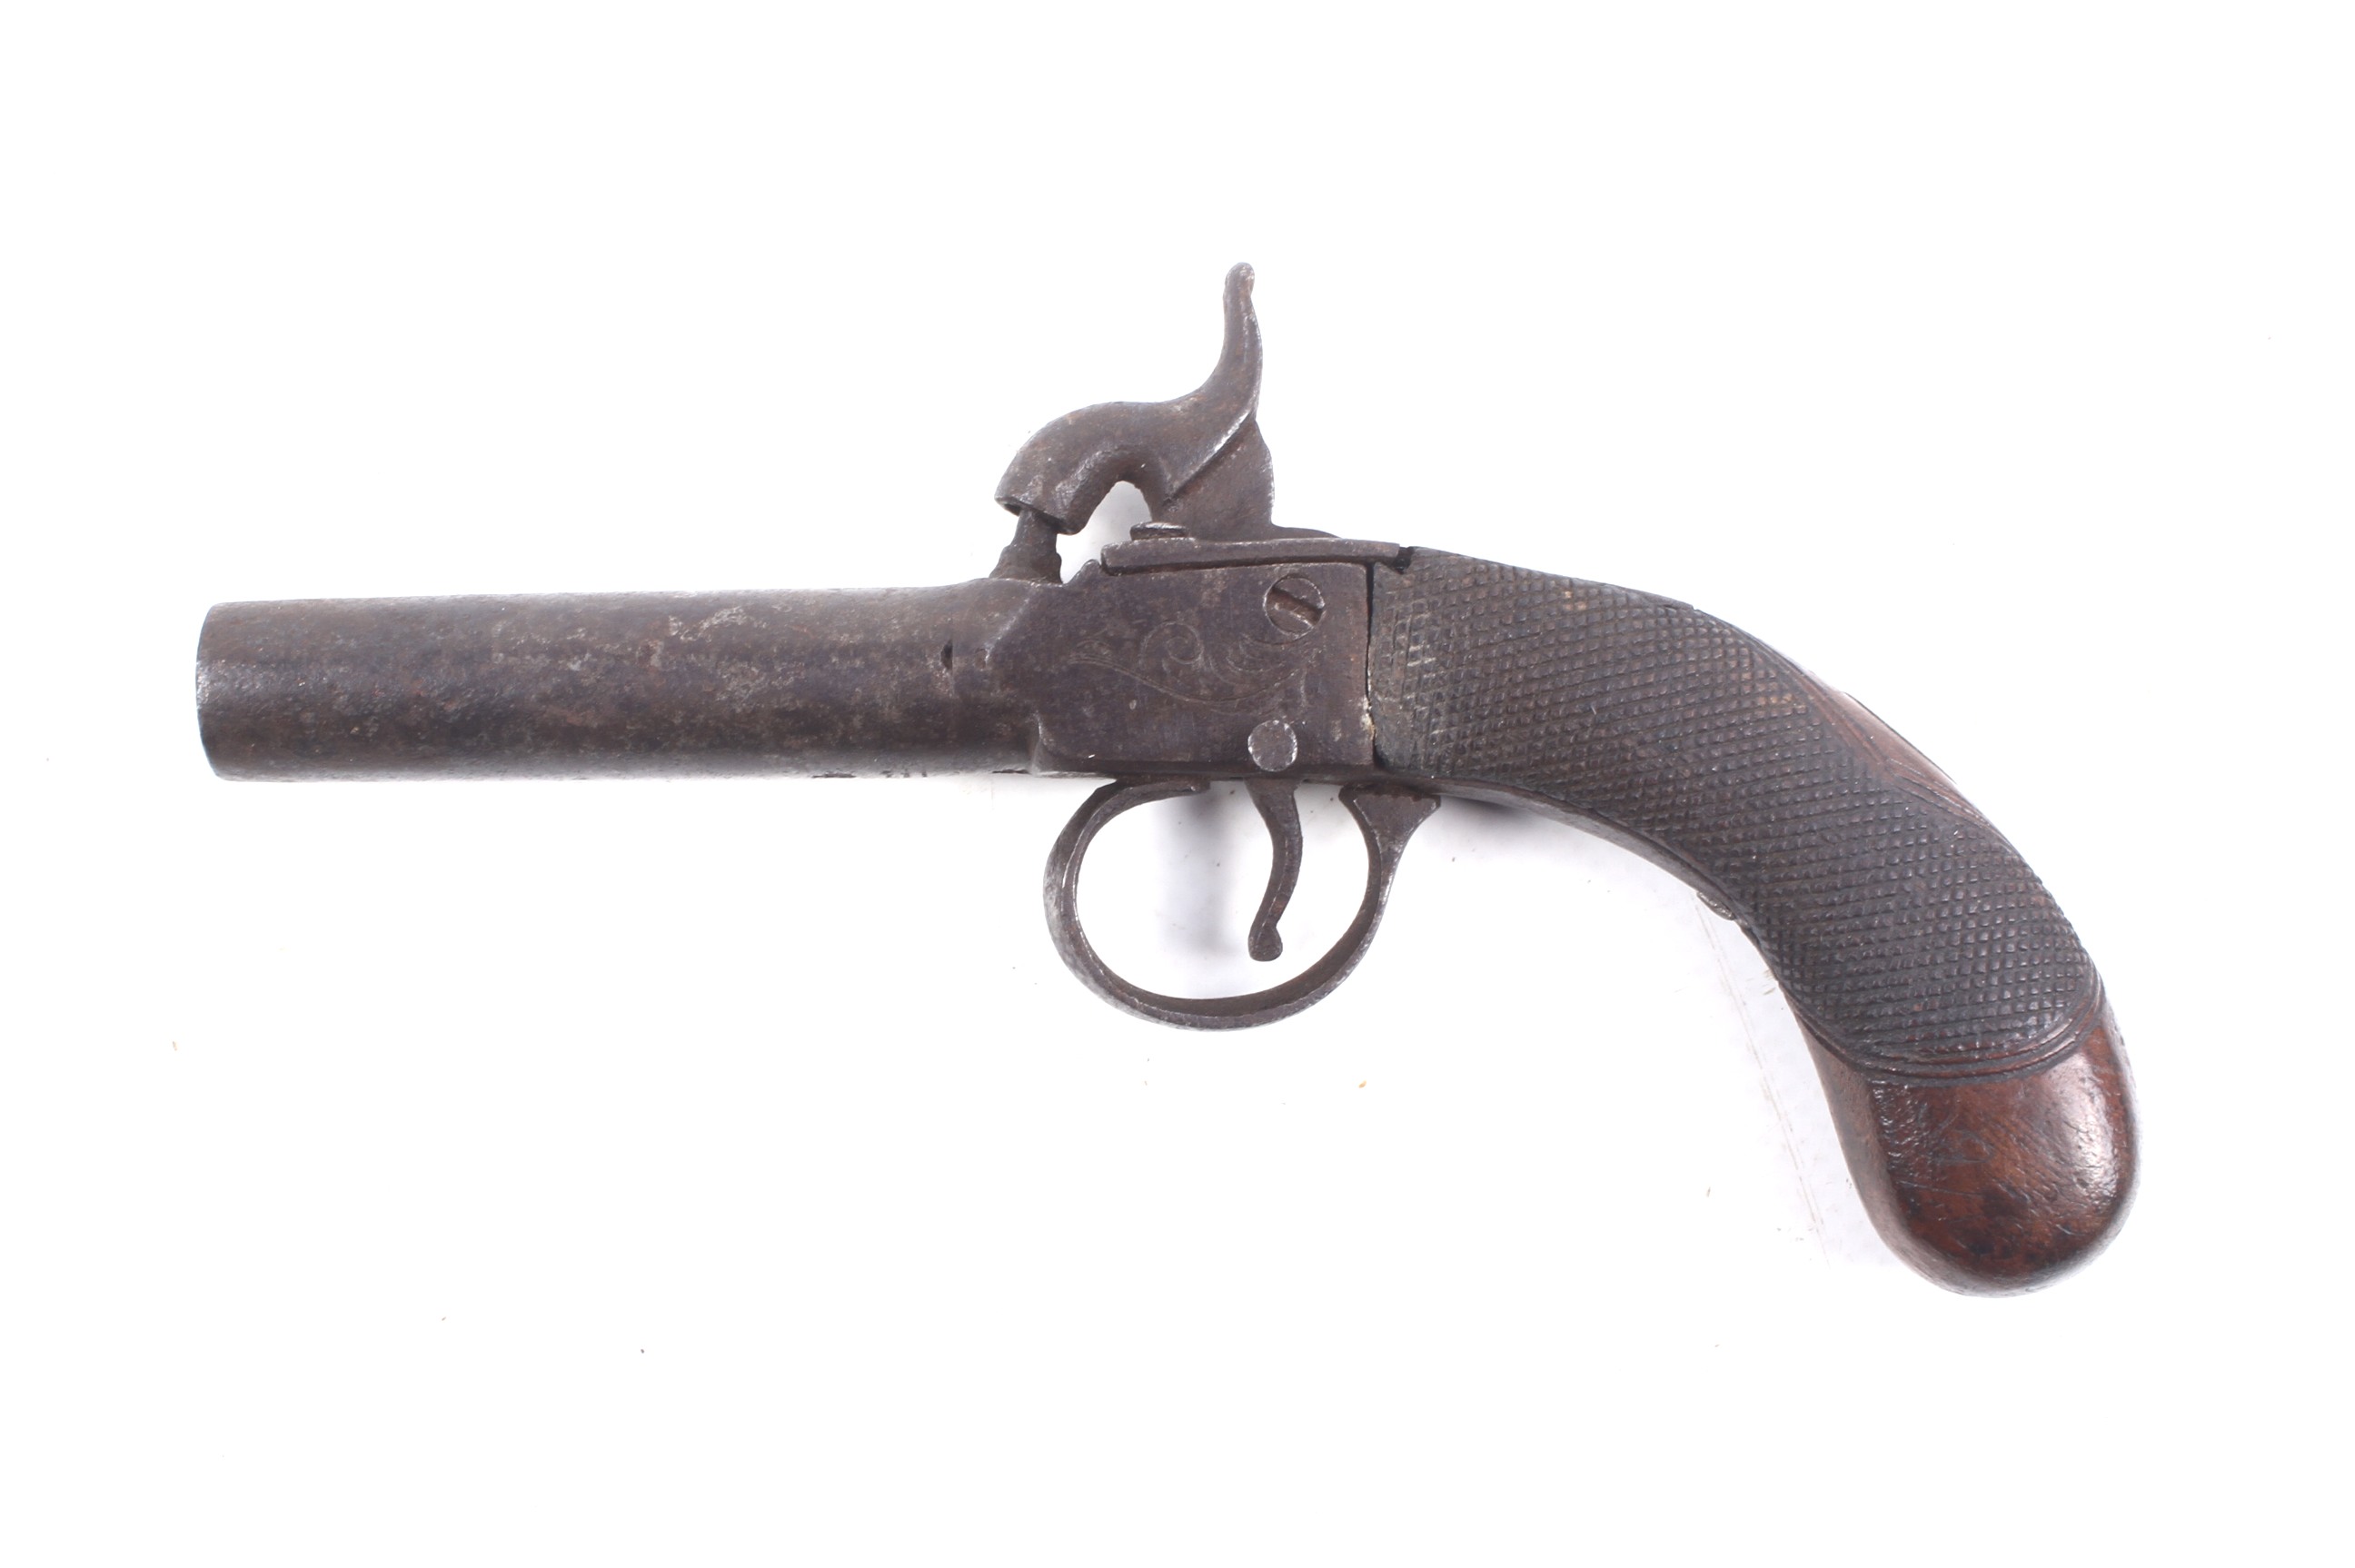 A circa 1860 percussion side hammer pocket pistol. With engraved sideplates and gripped stock. - Image 2 of 2